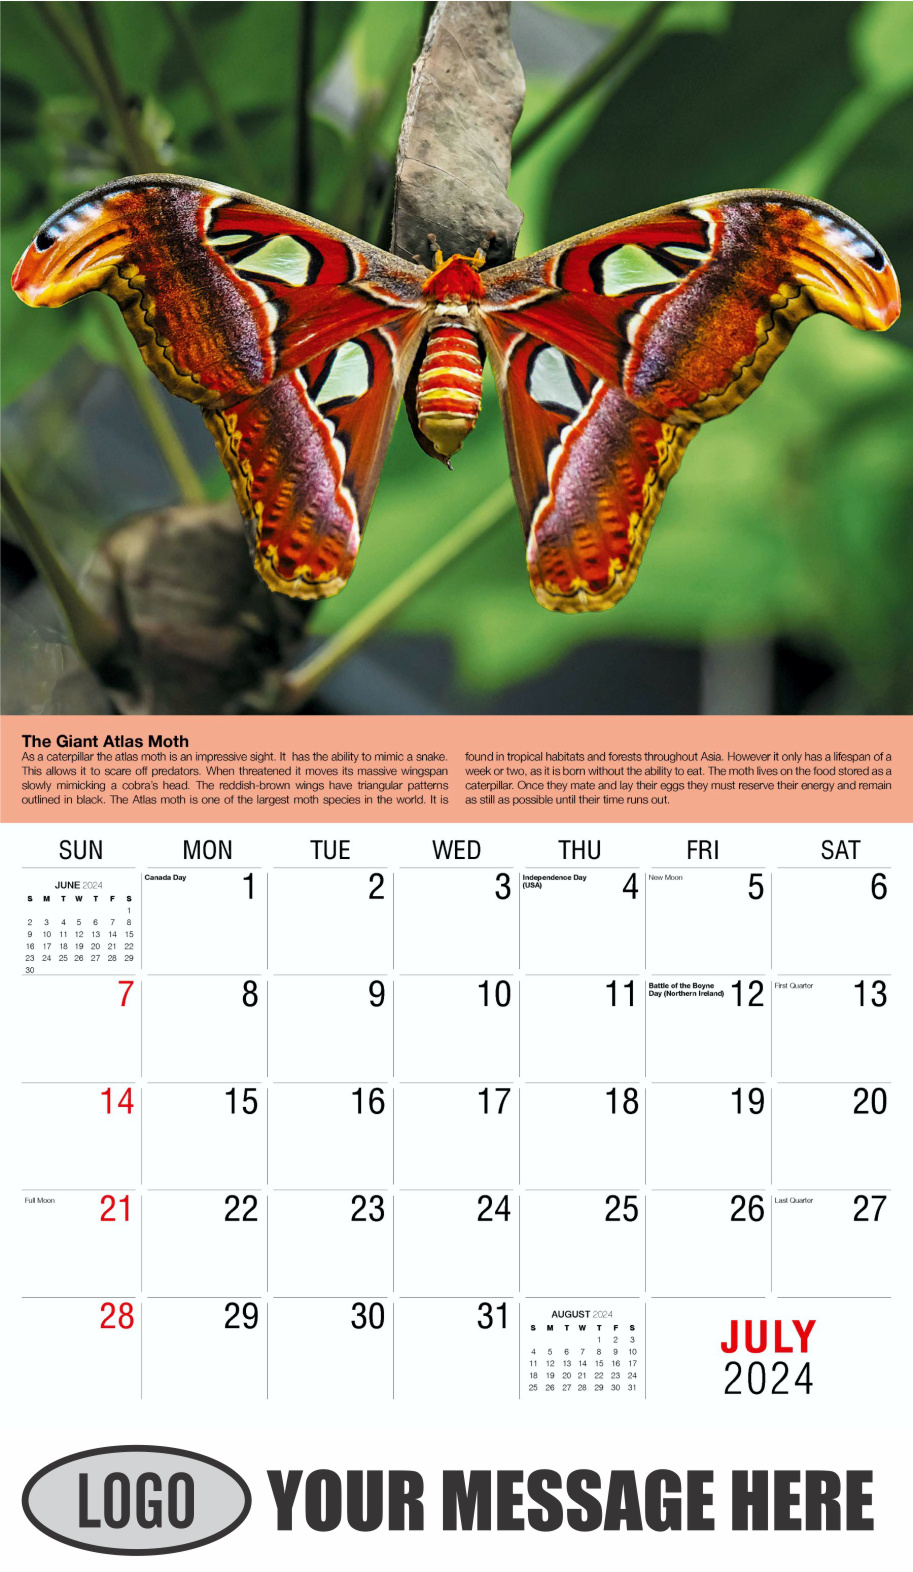 Planet Earth 2024 Business Promotional Wall Calendar - July